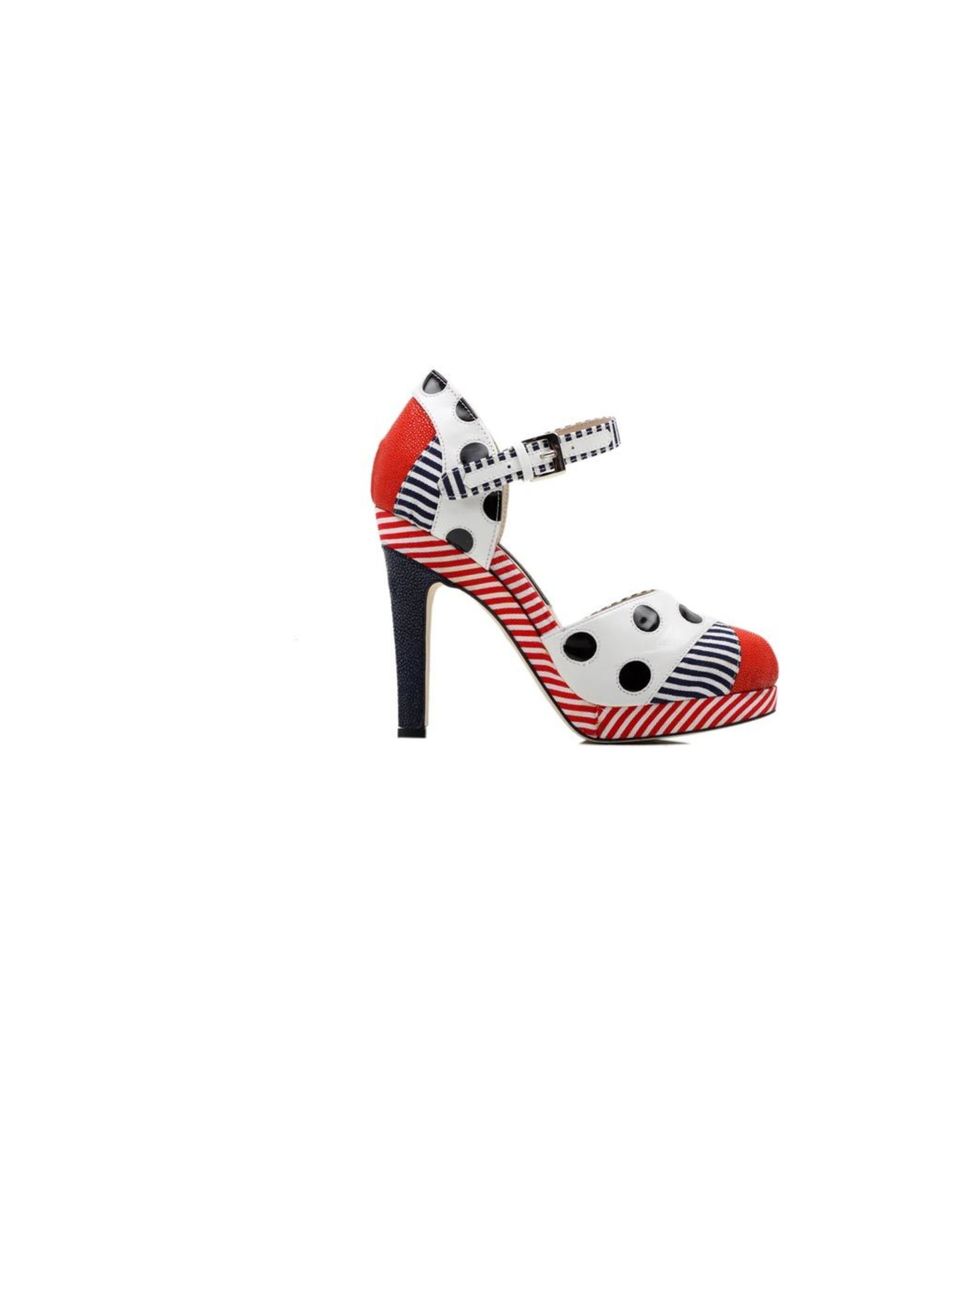 <p>Chrissie Morris 'Florence' sandals, £605, at <a href="http://www.matchesfashion.com/">Matches Fashion</a></p>